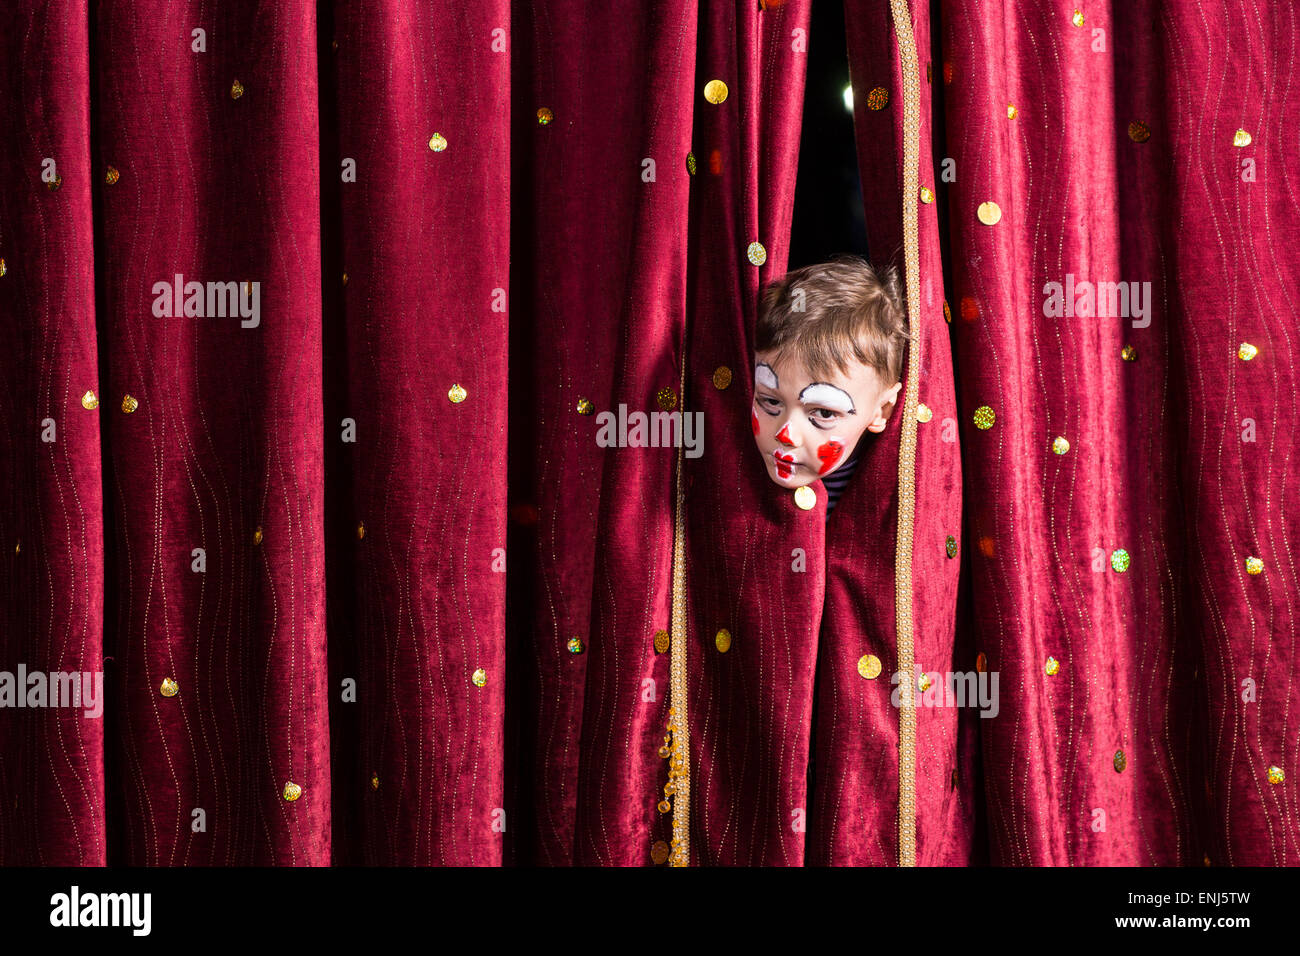 Impatient young boy actor wearing colorful red face paint peeking out ...